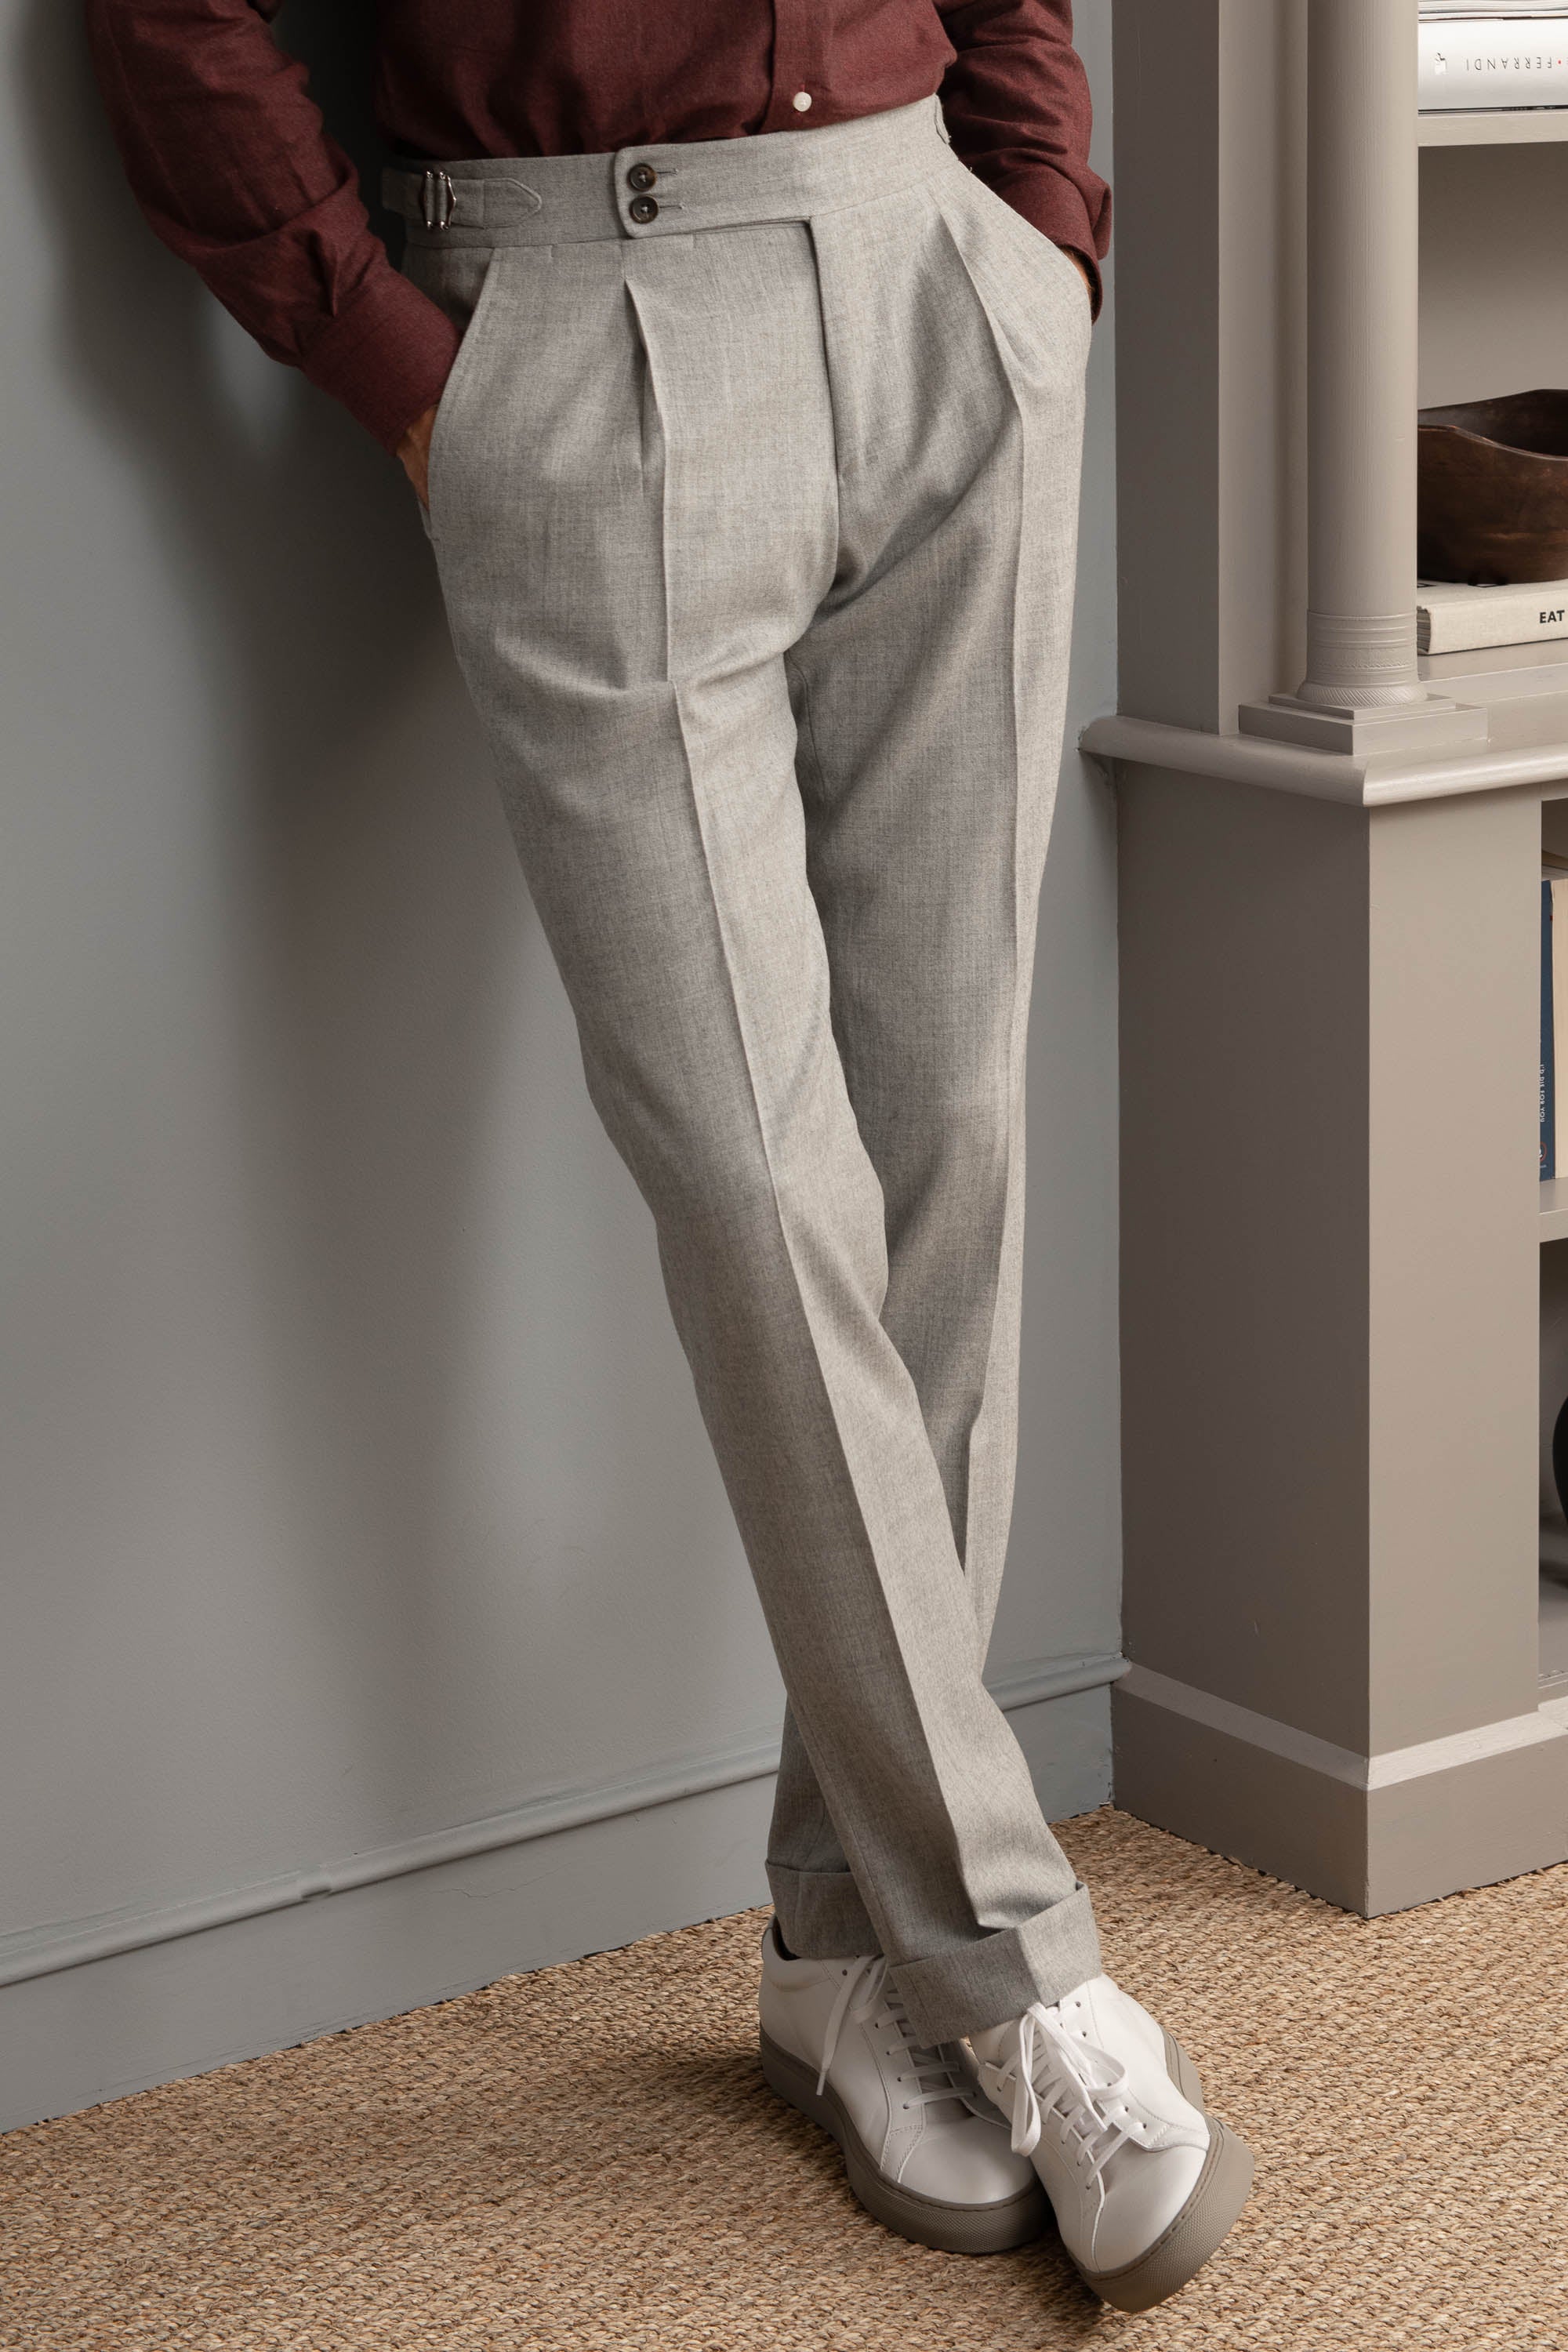 Why You Should Always Have Grey Flannel Trousers  He Spoke Style